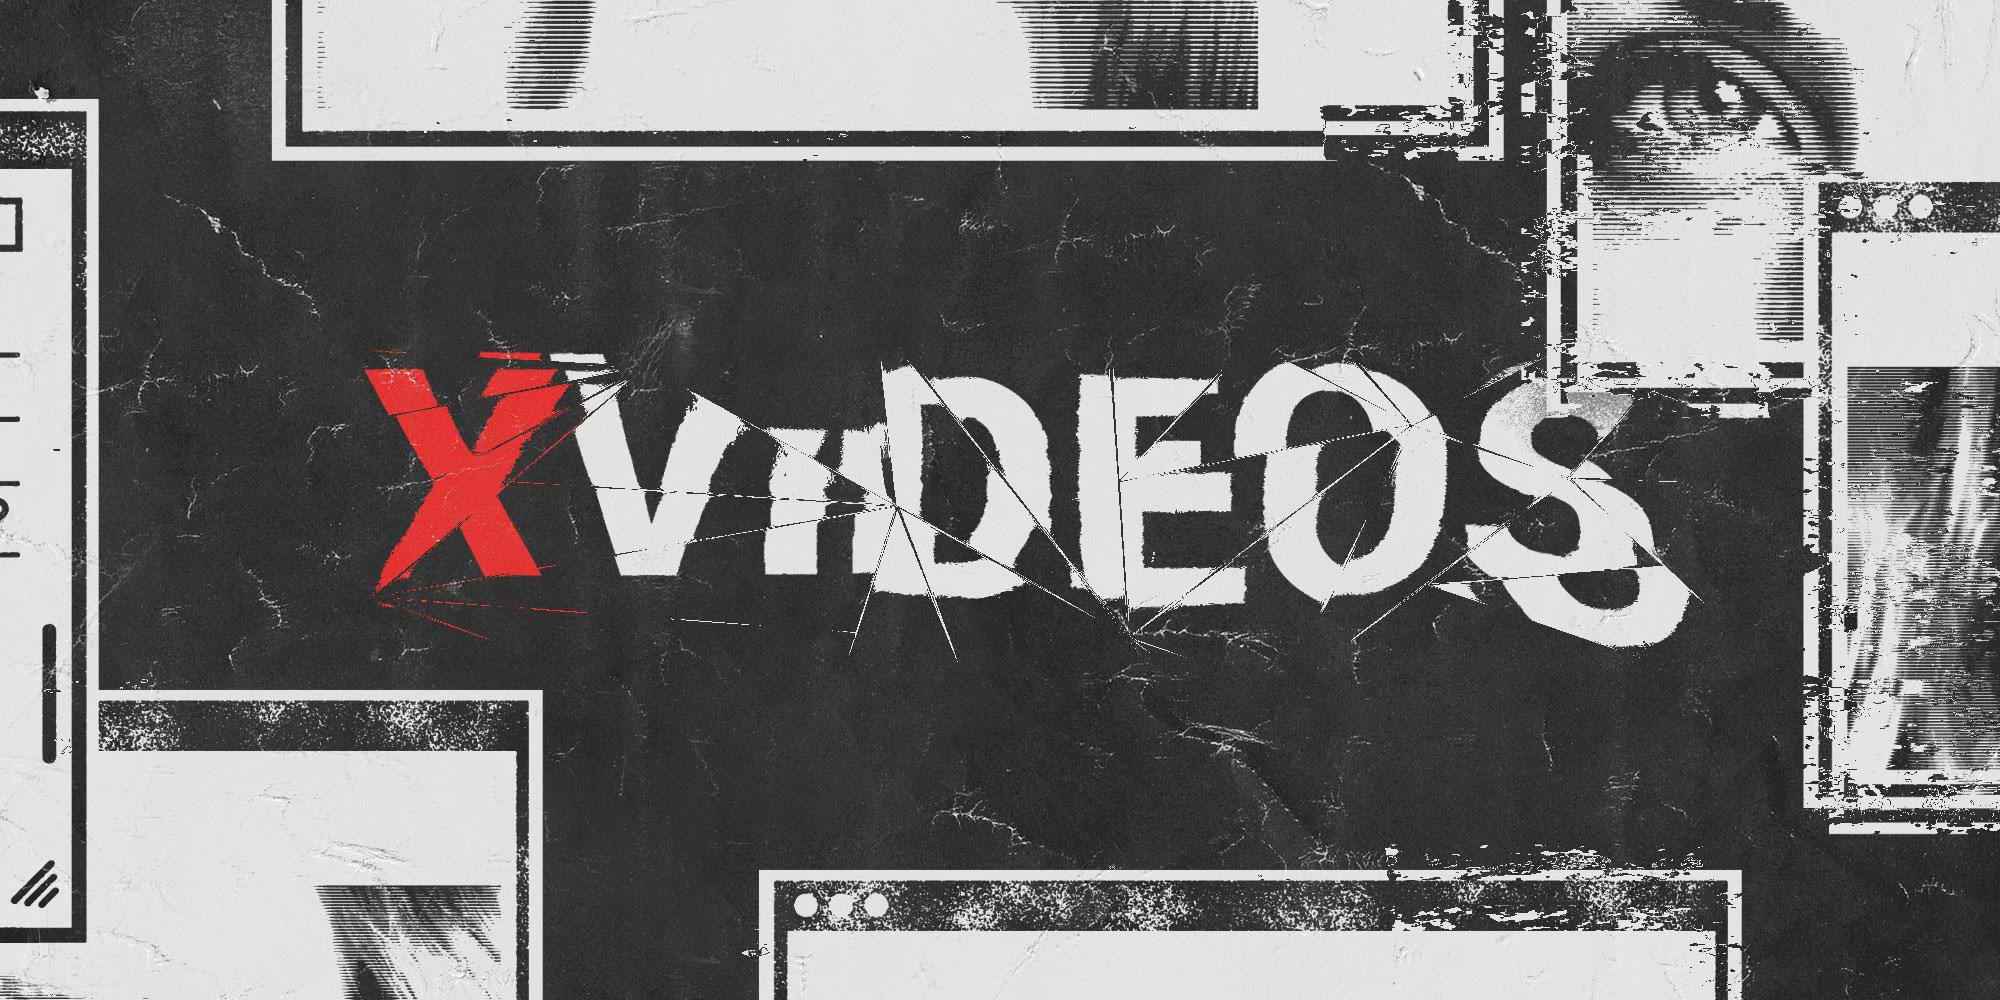 Xvideos Dawunlod - XVideos, World's Most Popular Porn Site, Reportedly Hosts Nonconsensual  Content & Child Exploitation